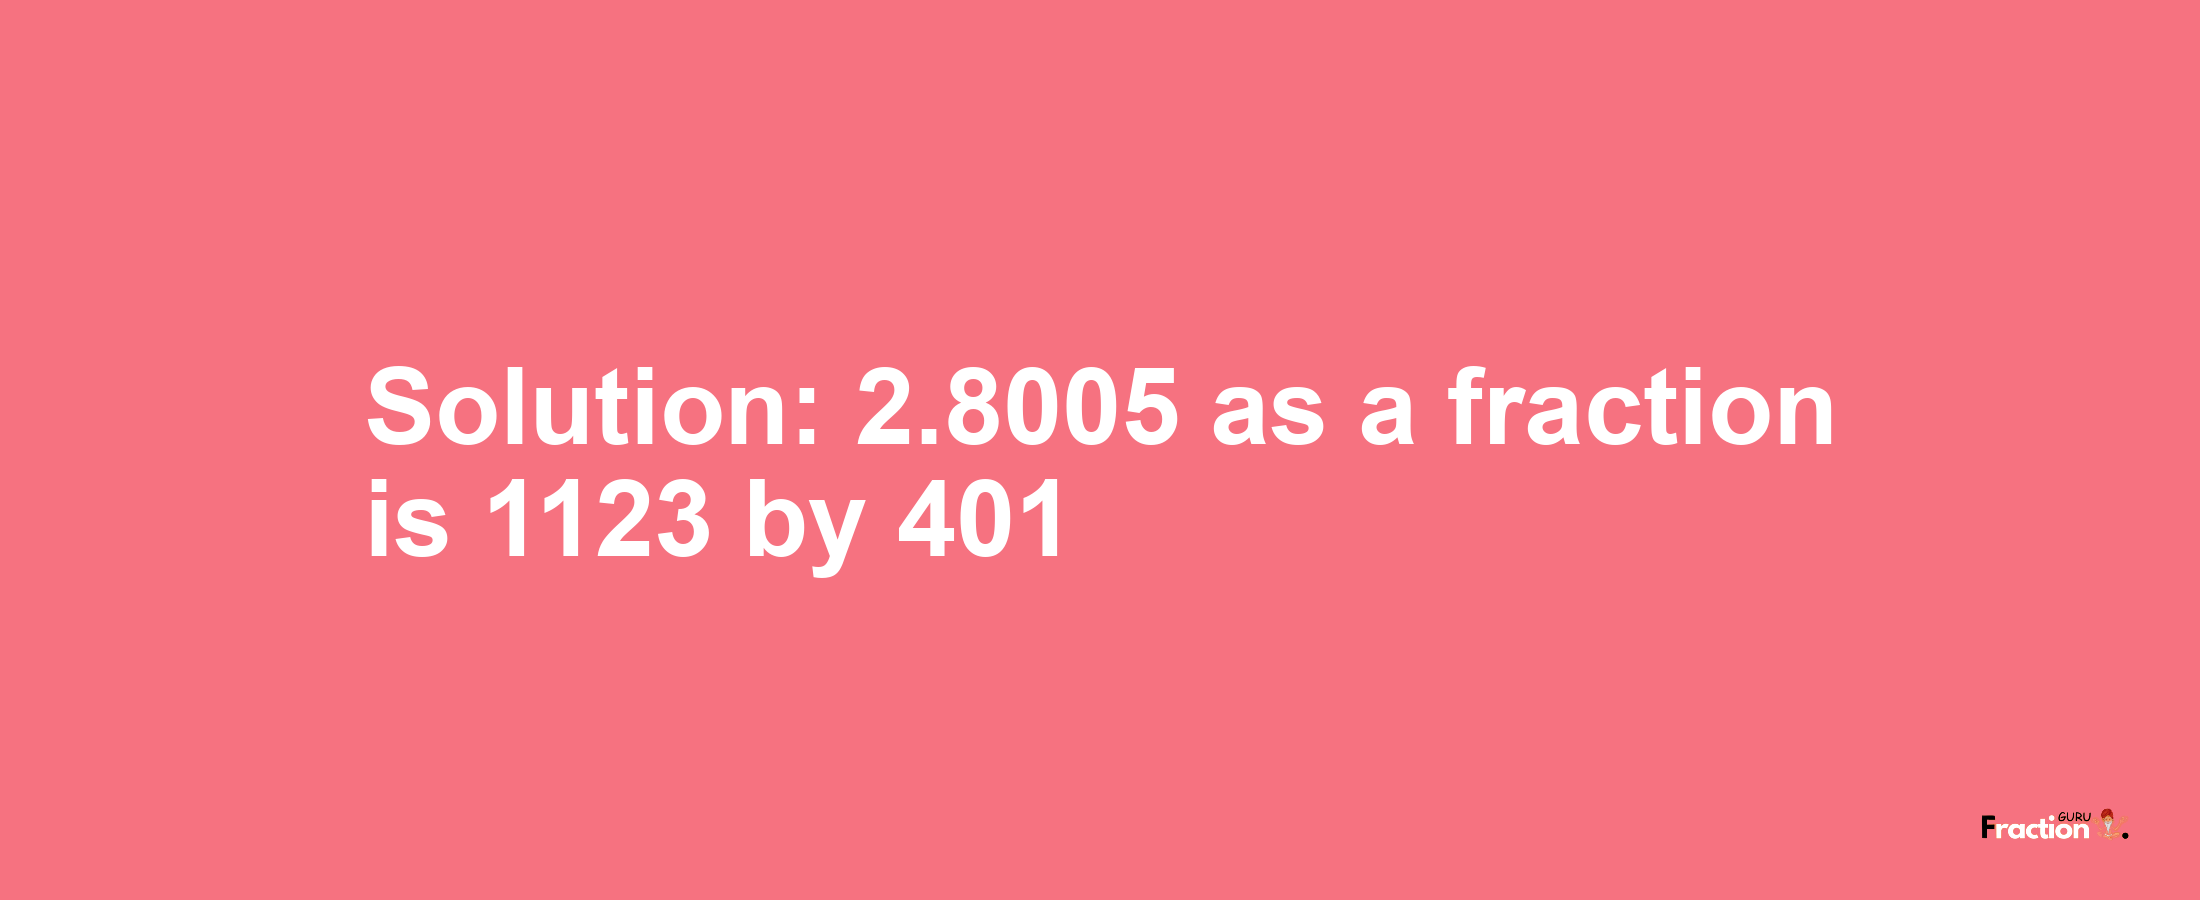 Solution:2.8005 as a fraction is 1123/401